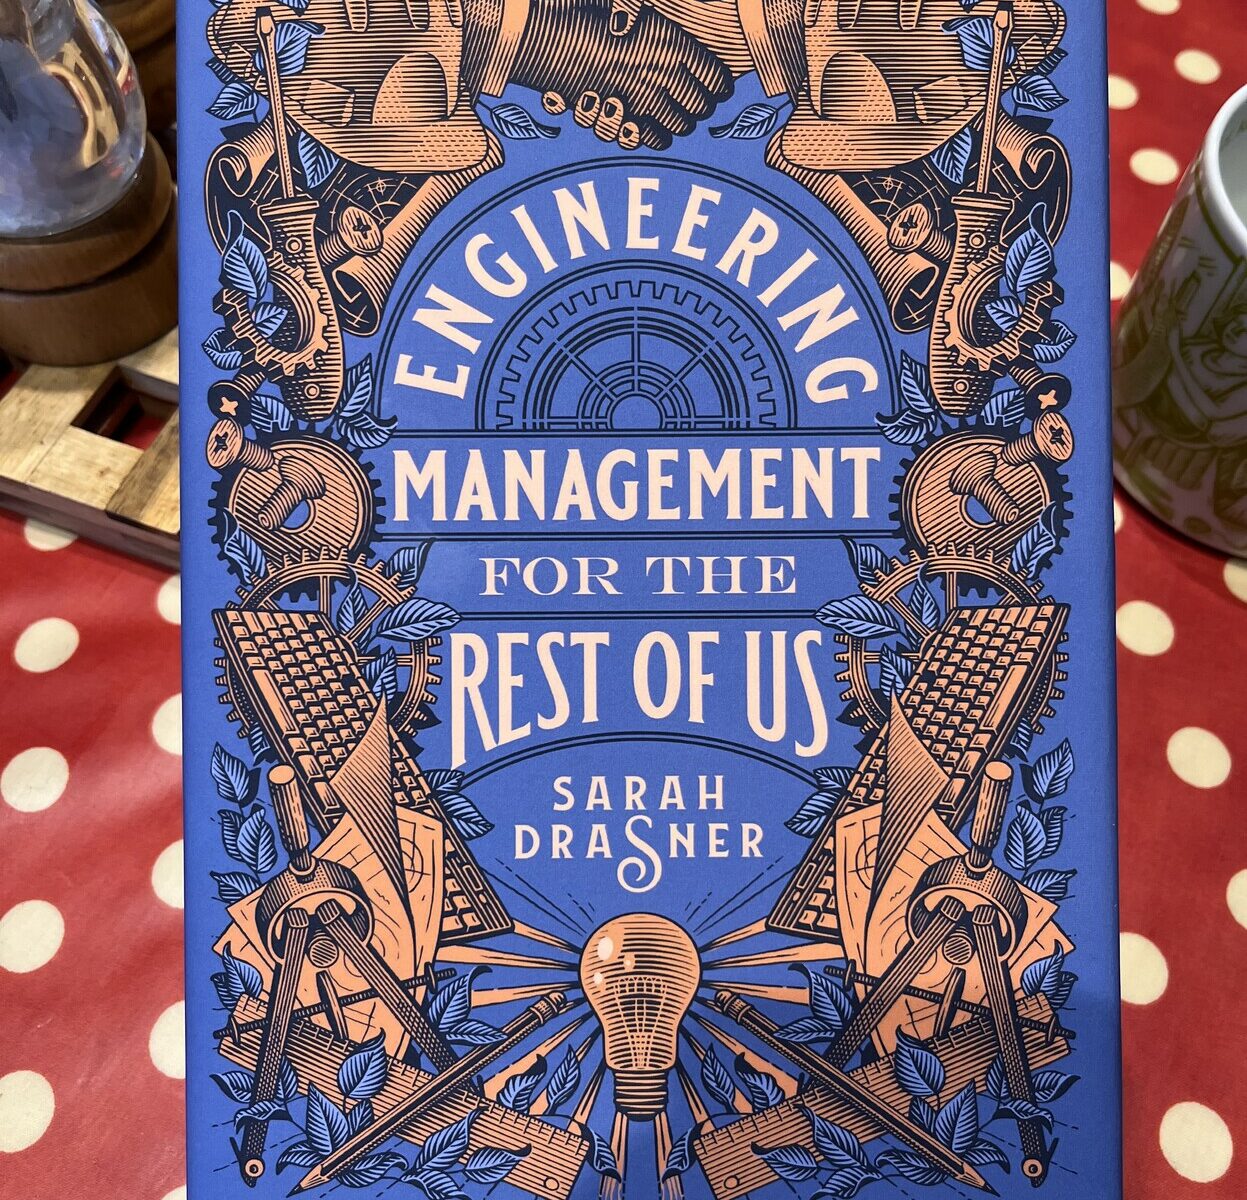 The beautiful cover of the book “Engineering Management for the rest of us” by Sarah Drasner